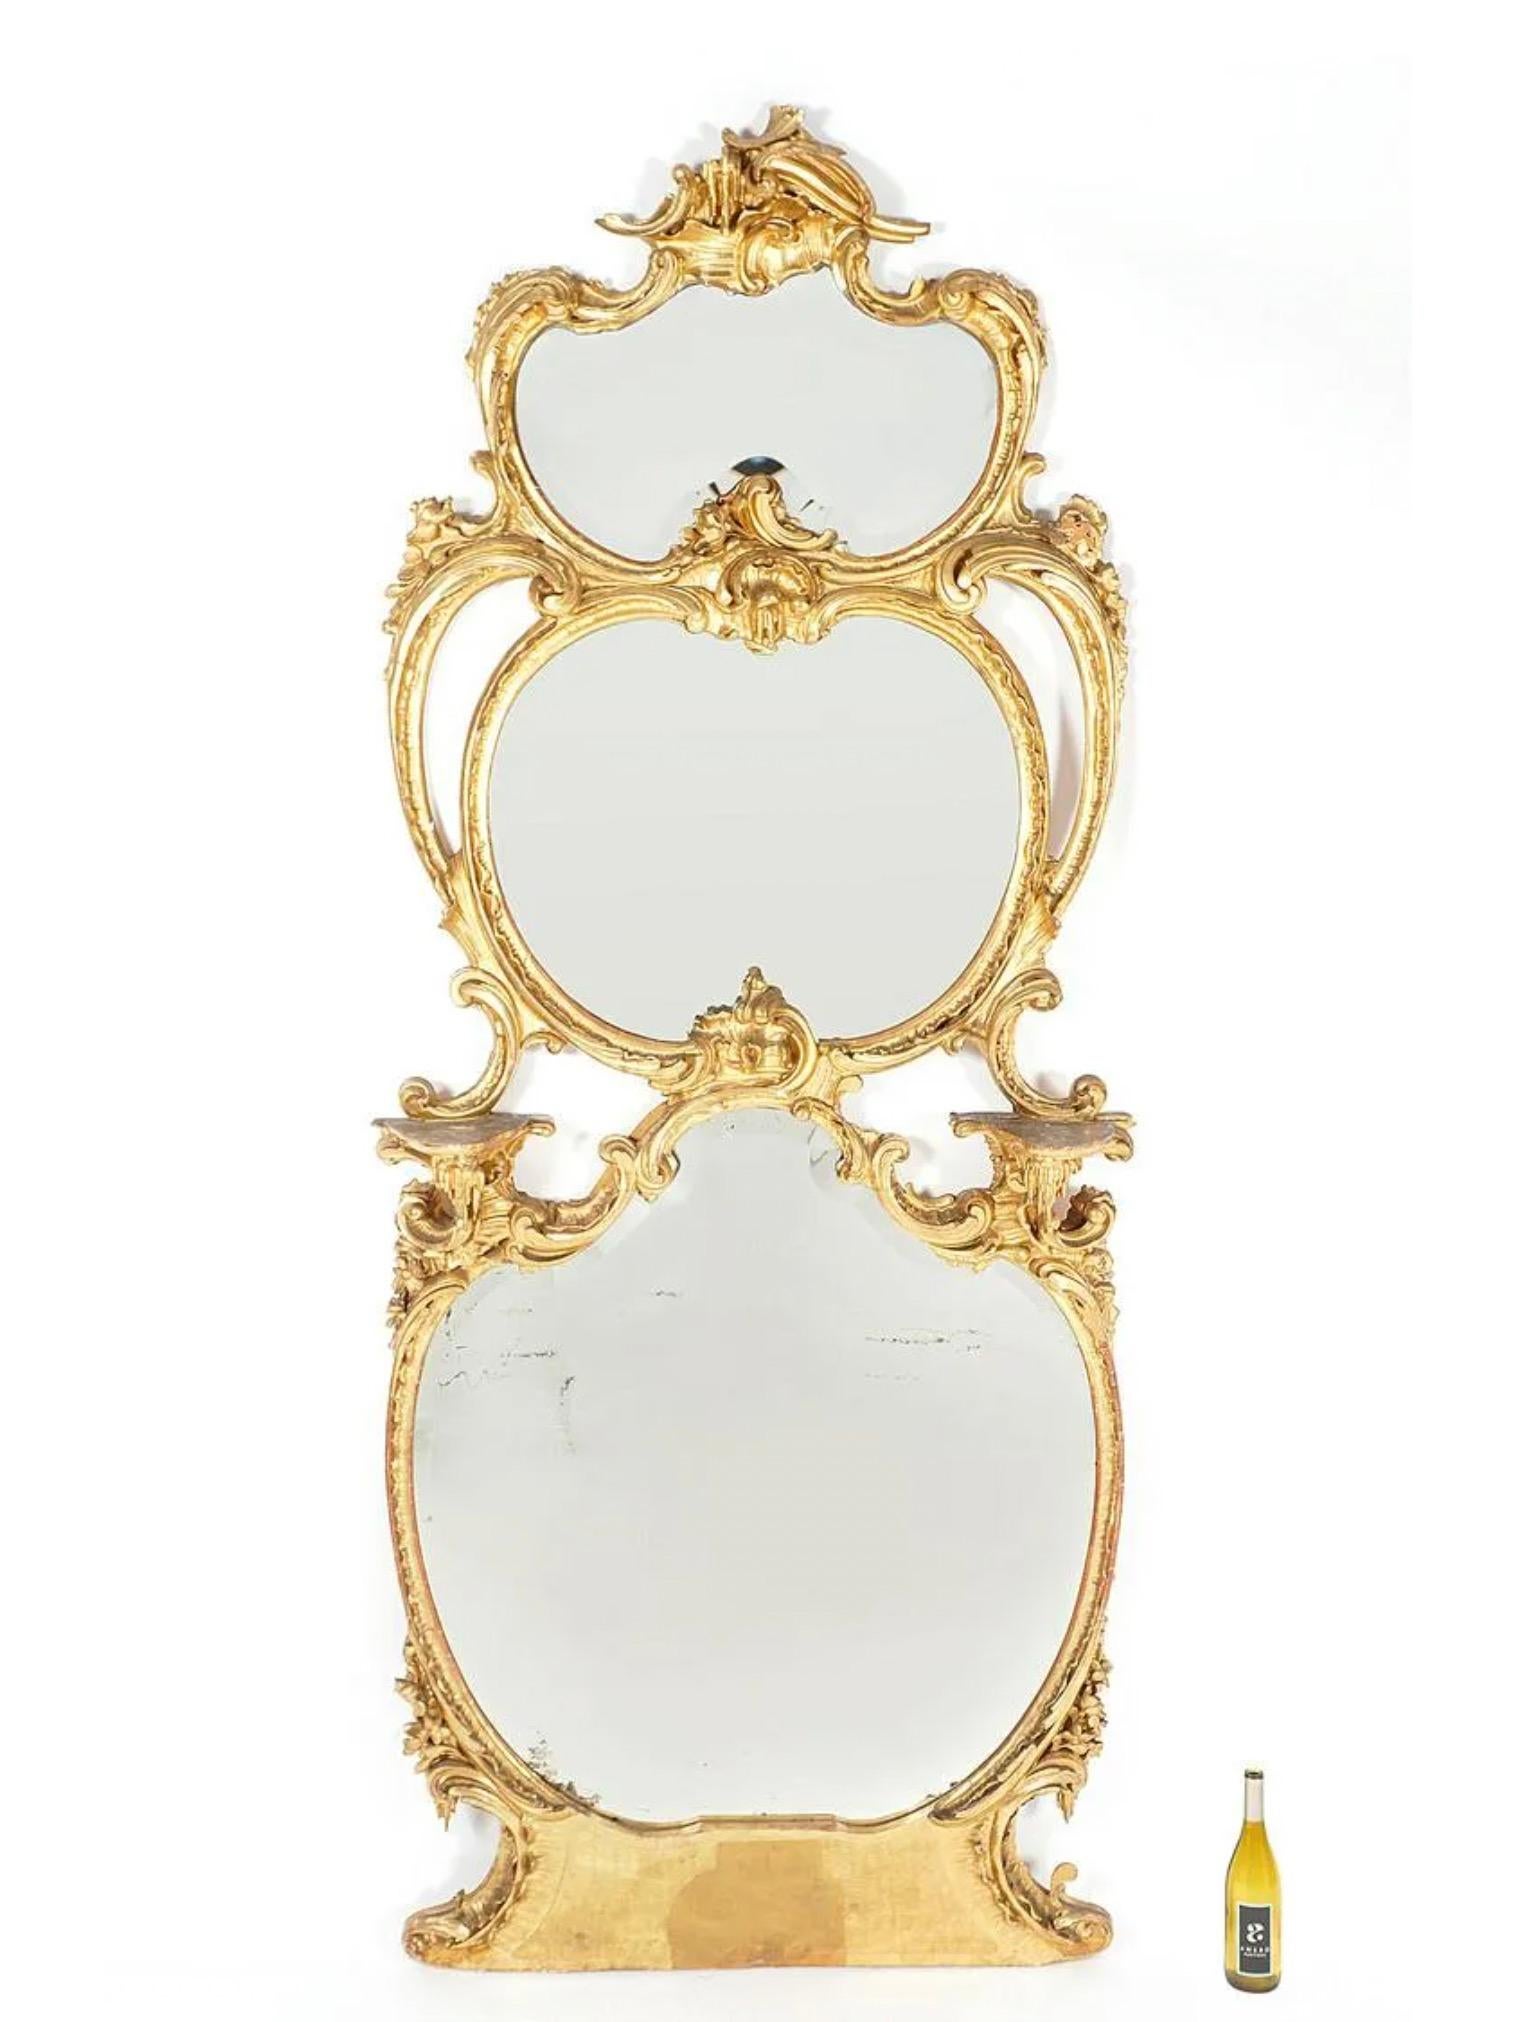 Large Italian rococo style gilt wood wall mirror, frame with foliate scroll and shell motifs, two candle shelves. Three shaped mirror panels.
 